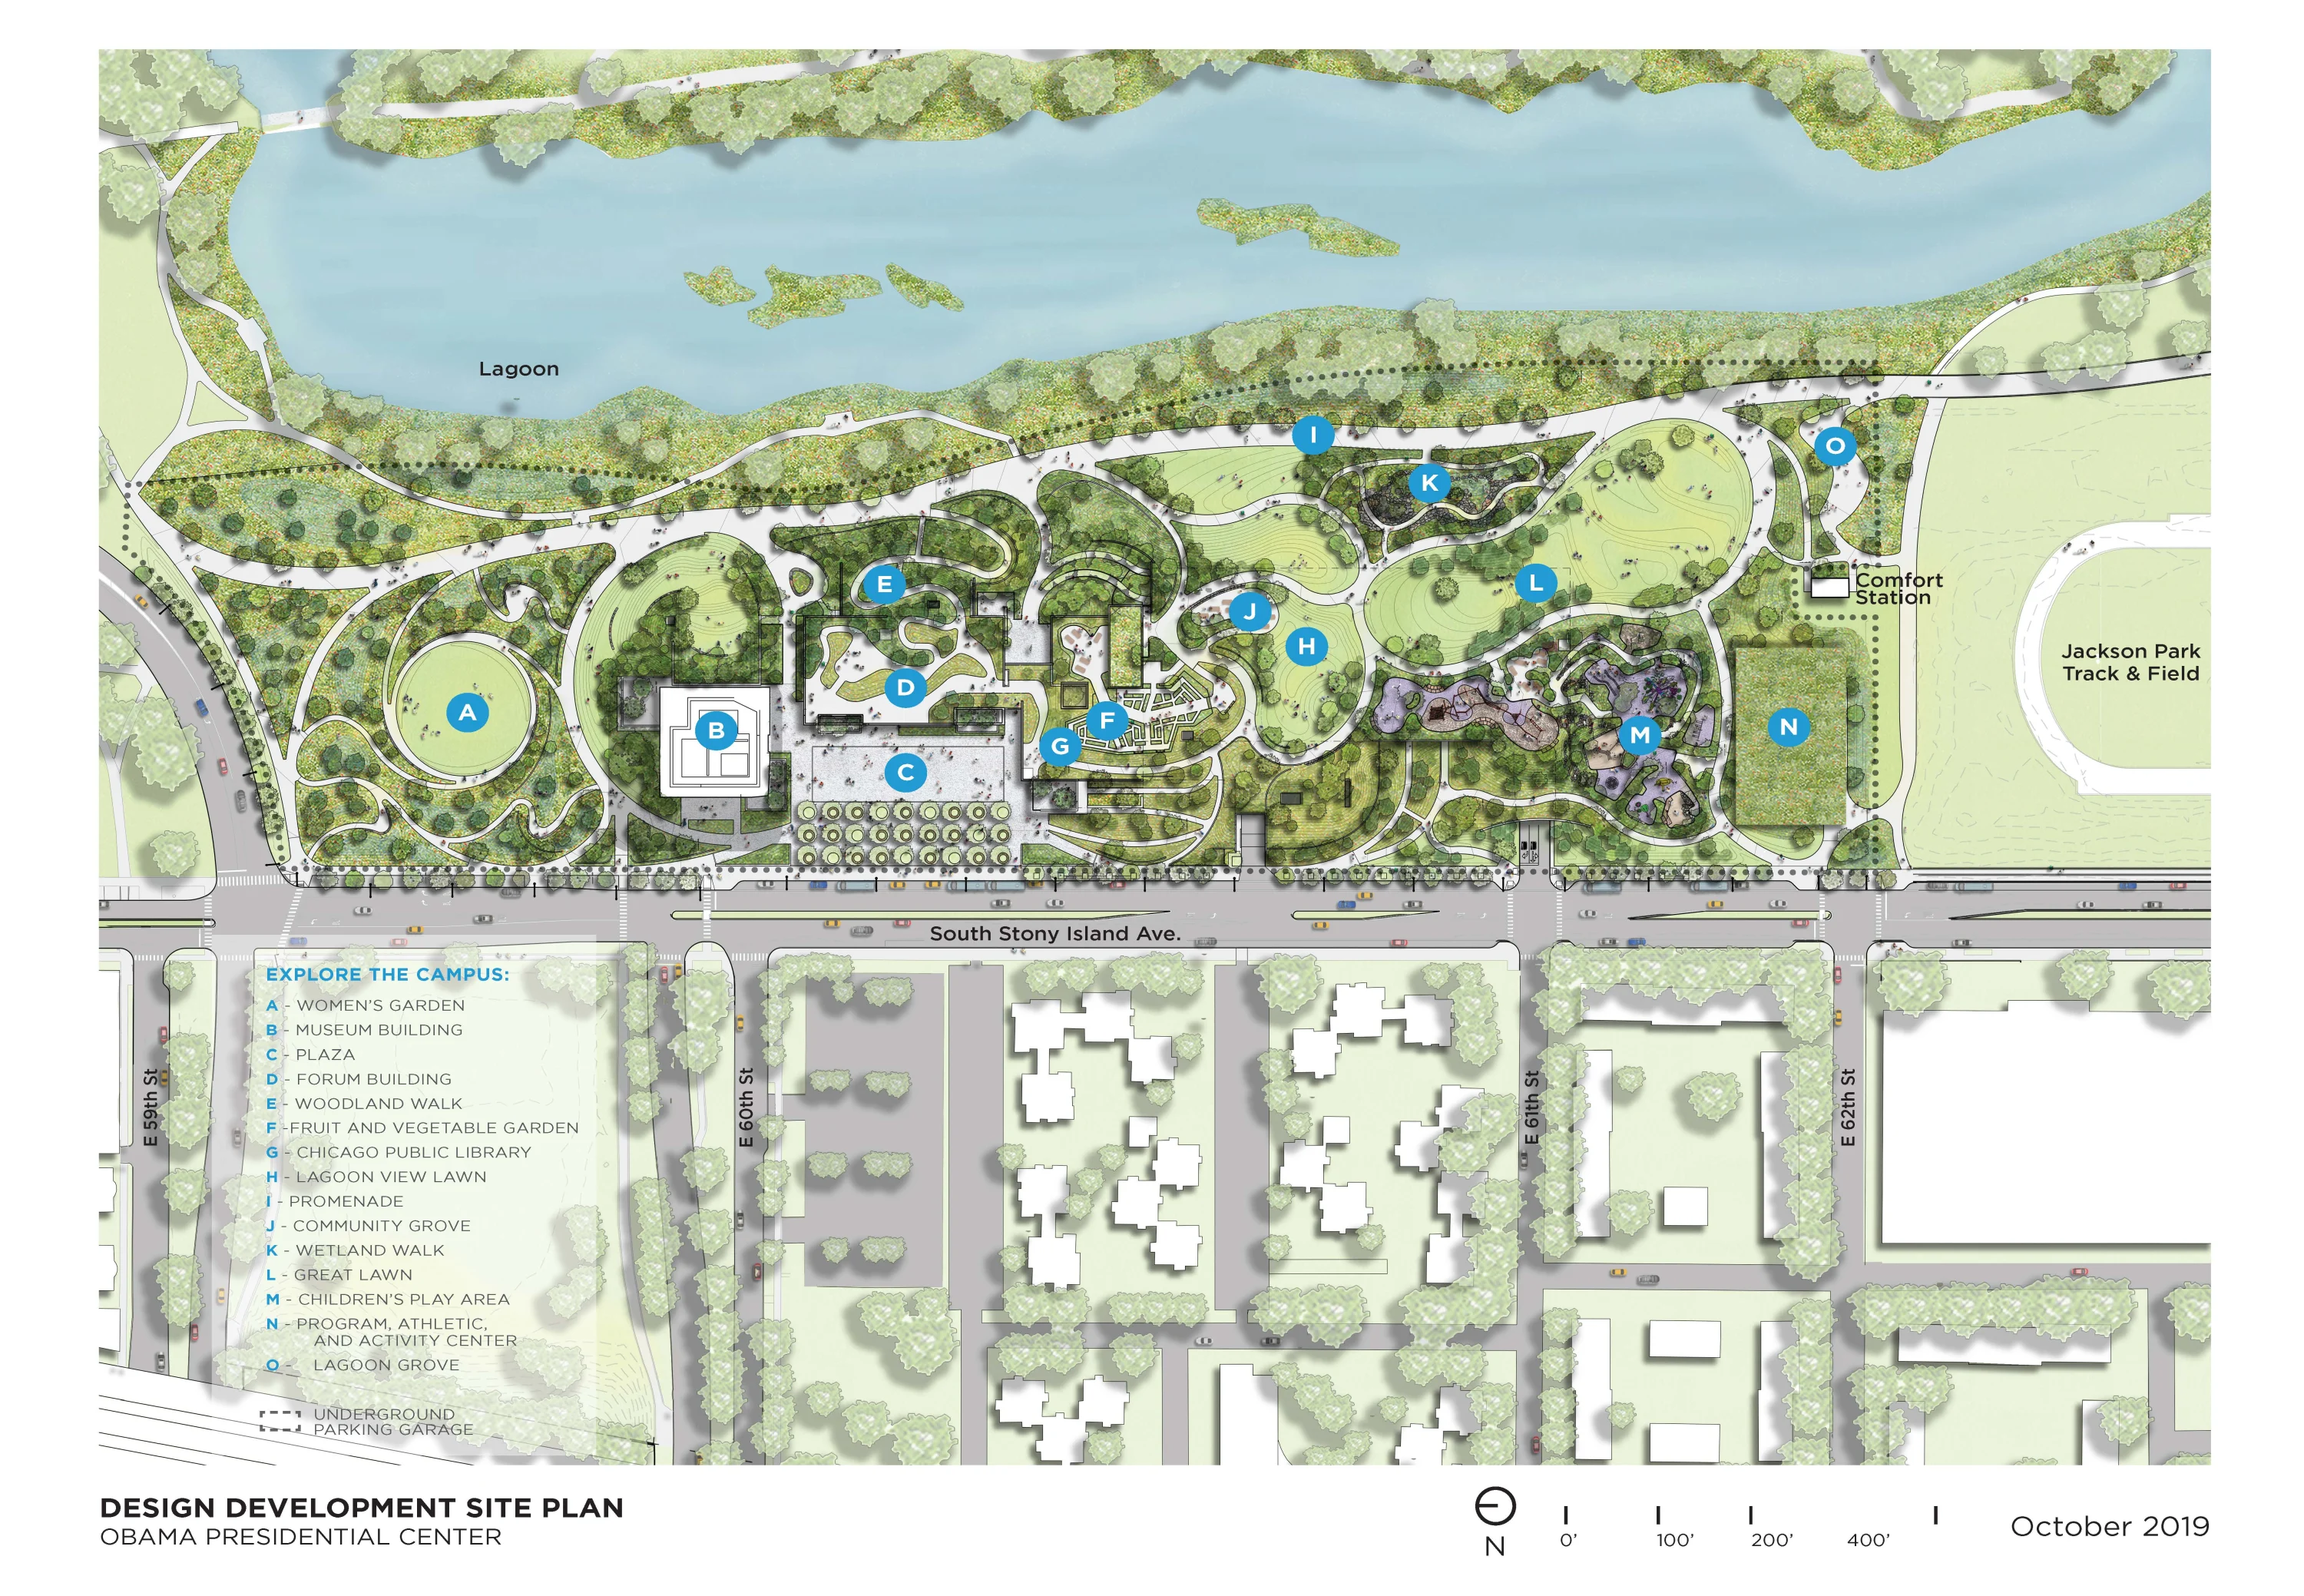 A mostly green and gray graphic map with buildings marked with letters of the alphabet. The words "Design Development Site Plan, Obama Presidential Center" are written at the bottom, along with "October 2019" in the right bottom corner.